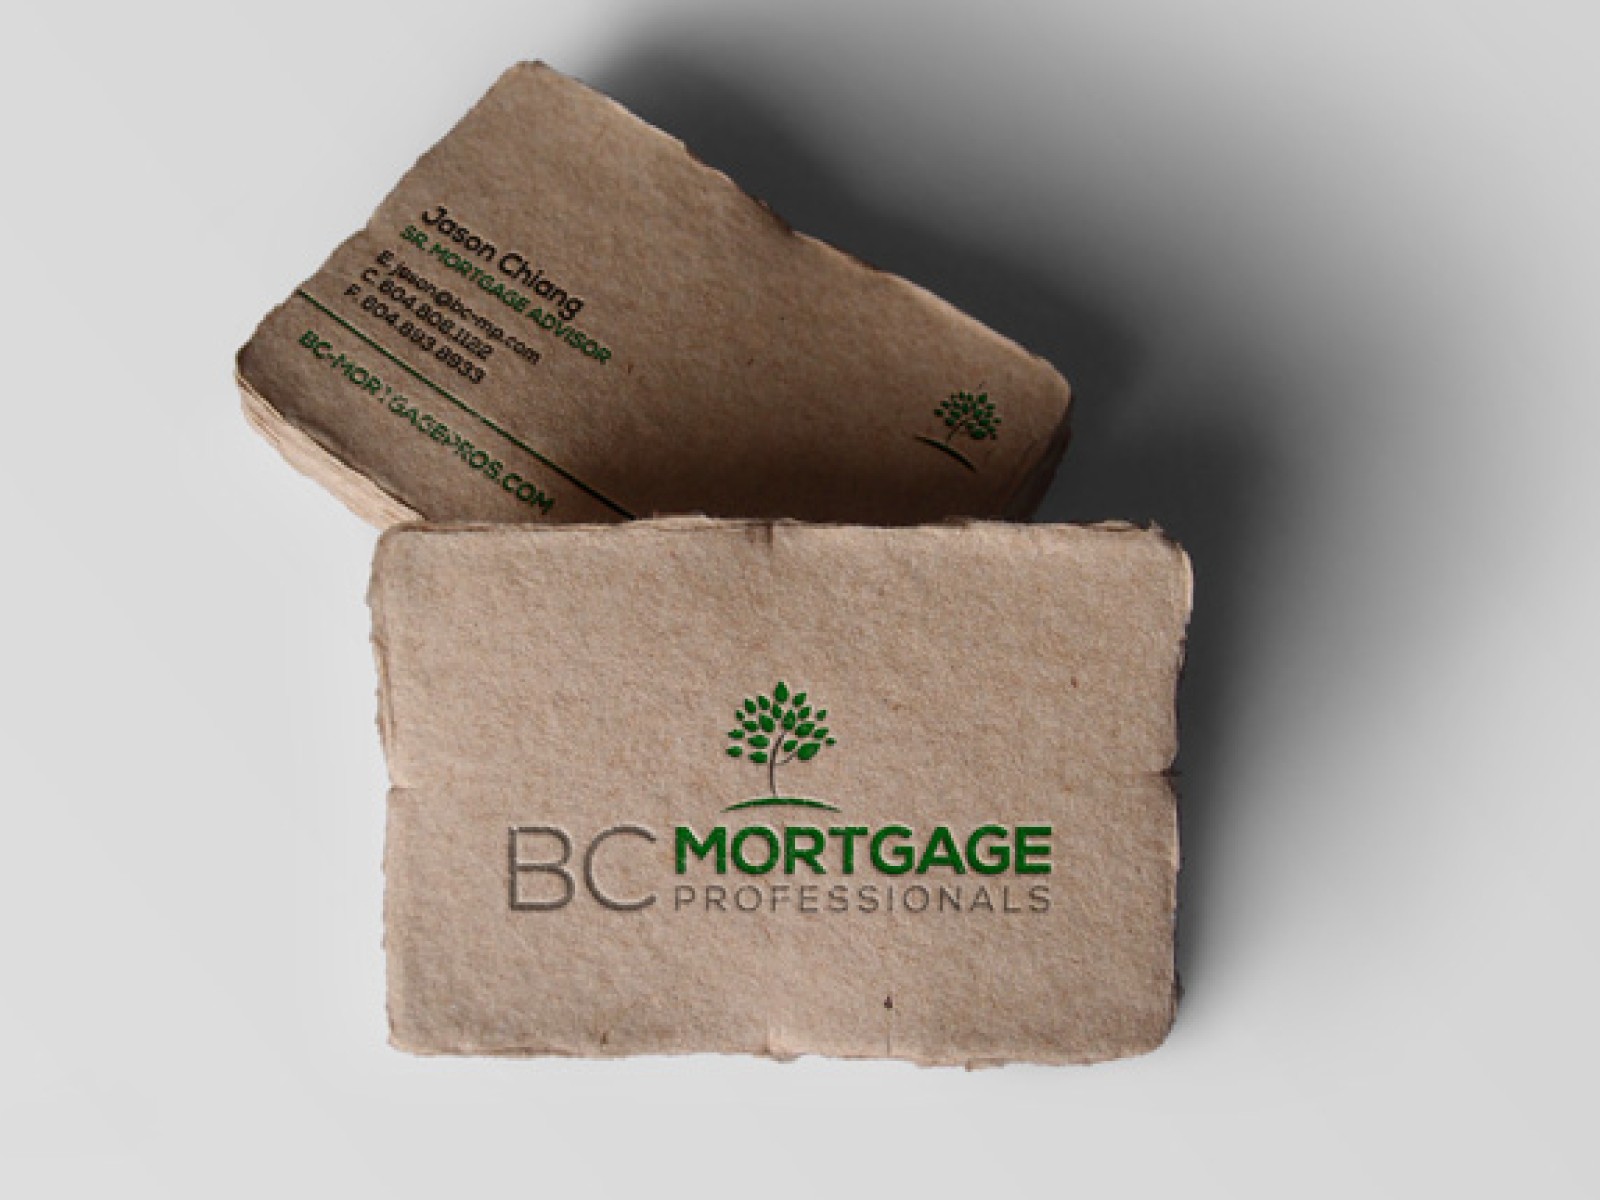 An eco-friendly business card.